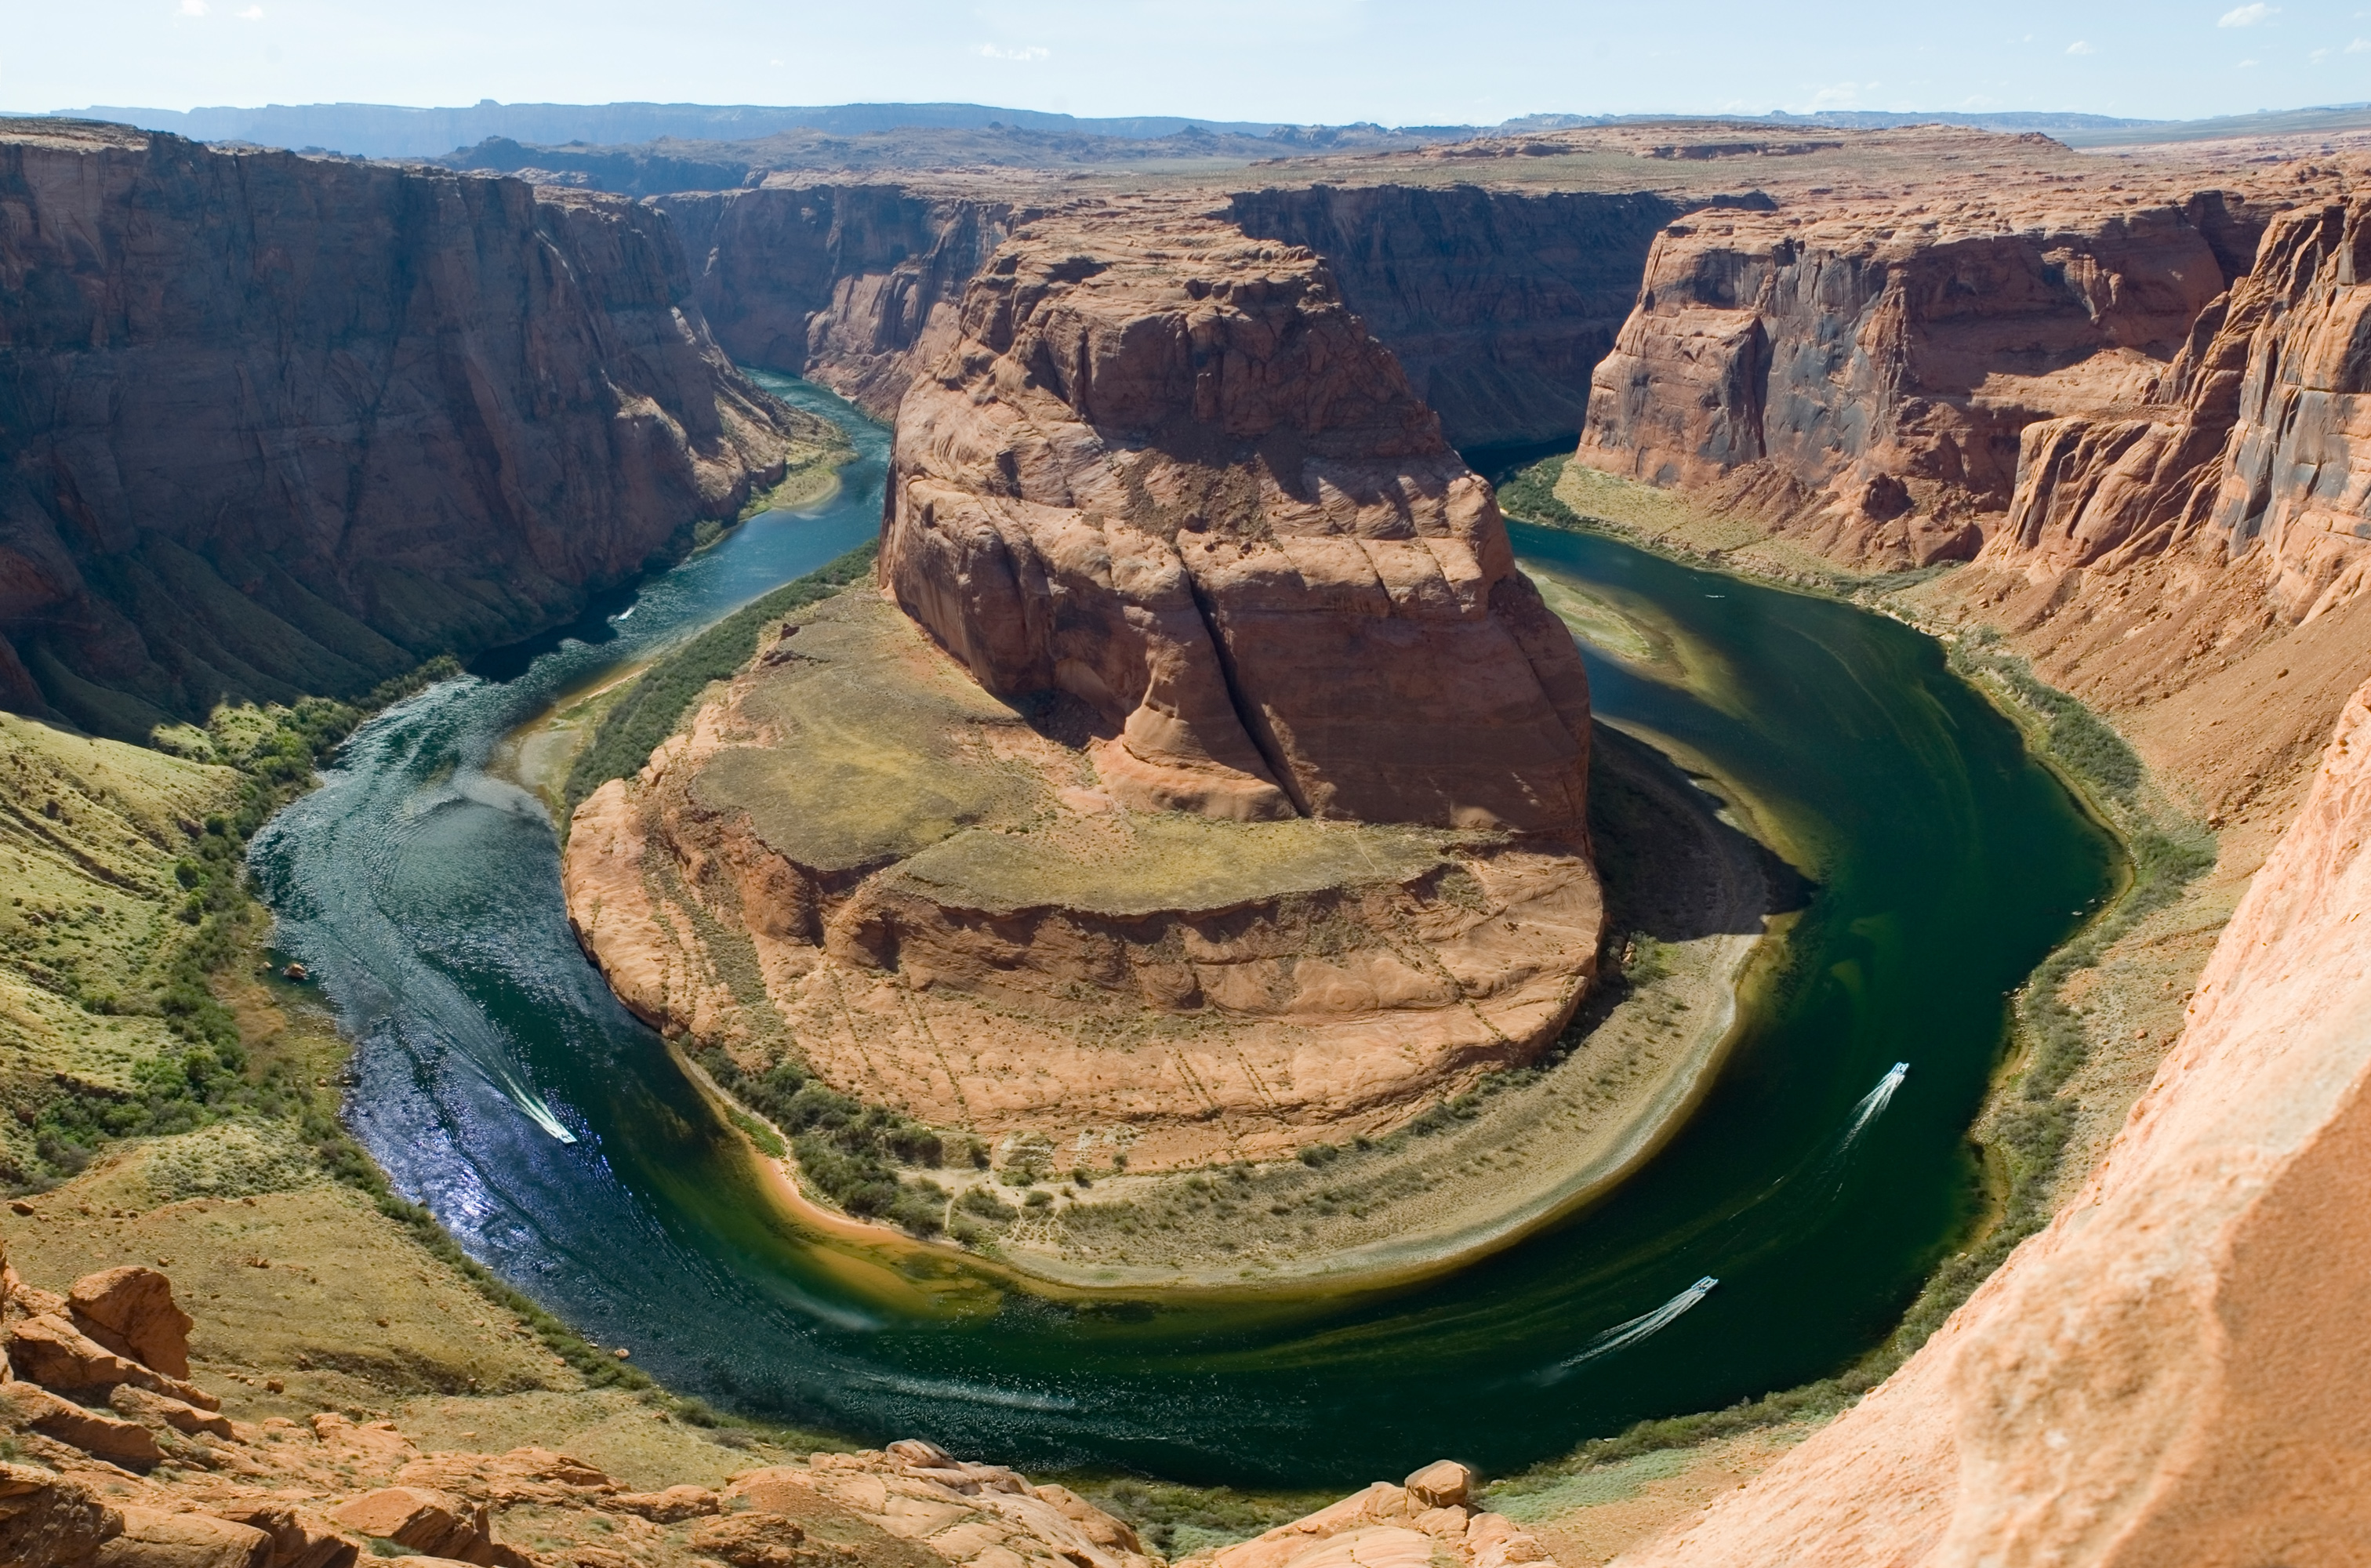 Boats follow the extreme curve of a river at the bottom of a canyon..